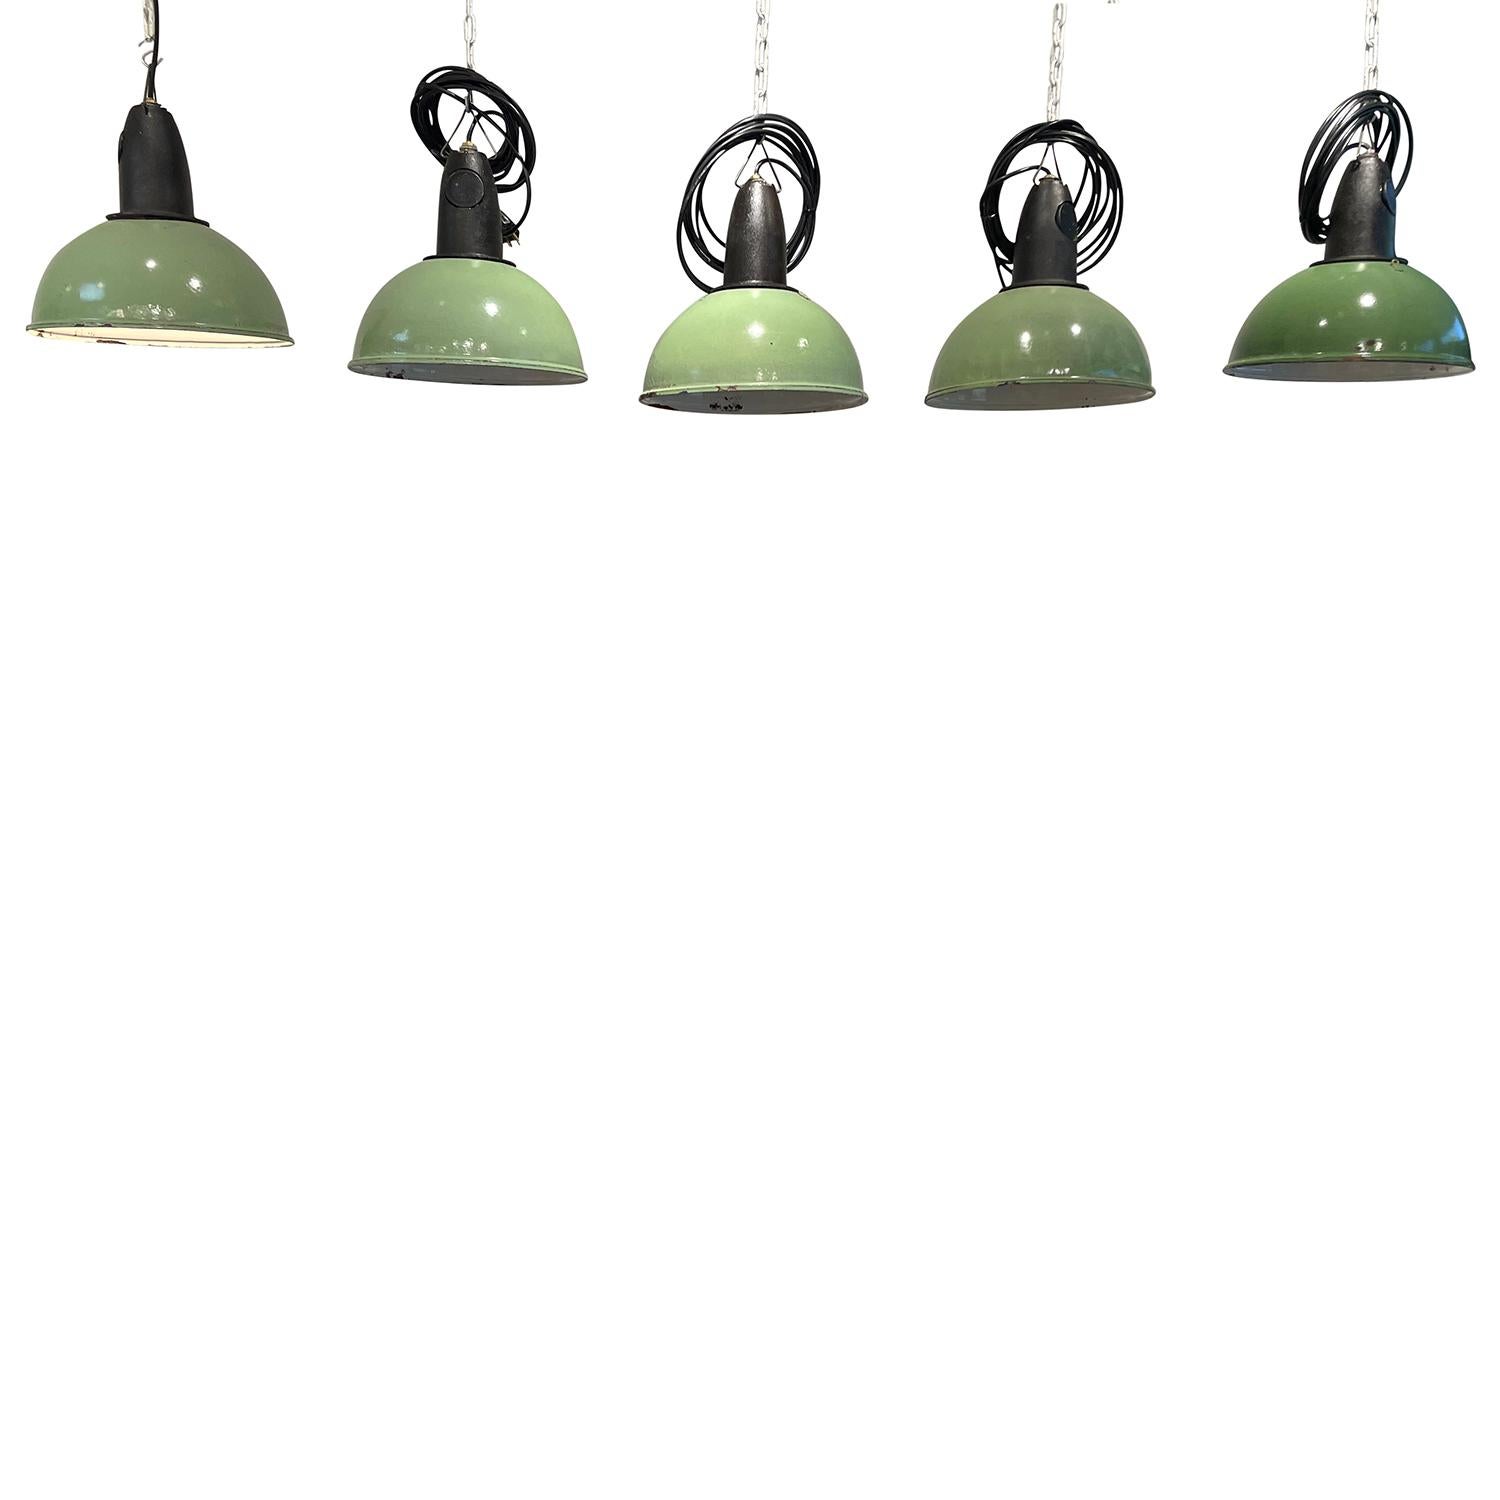 A vintage French Industrial similar set of five green ceiling lights, lamps made of hand crafted metal, in good condition. Each of the round pendants contain a single light socket. The wires have been renewed. Minor fading, due to age. Wear